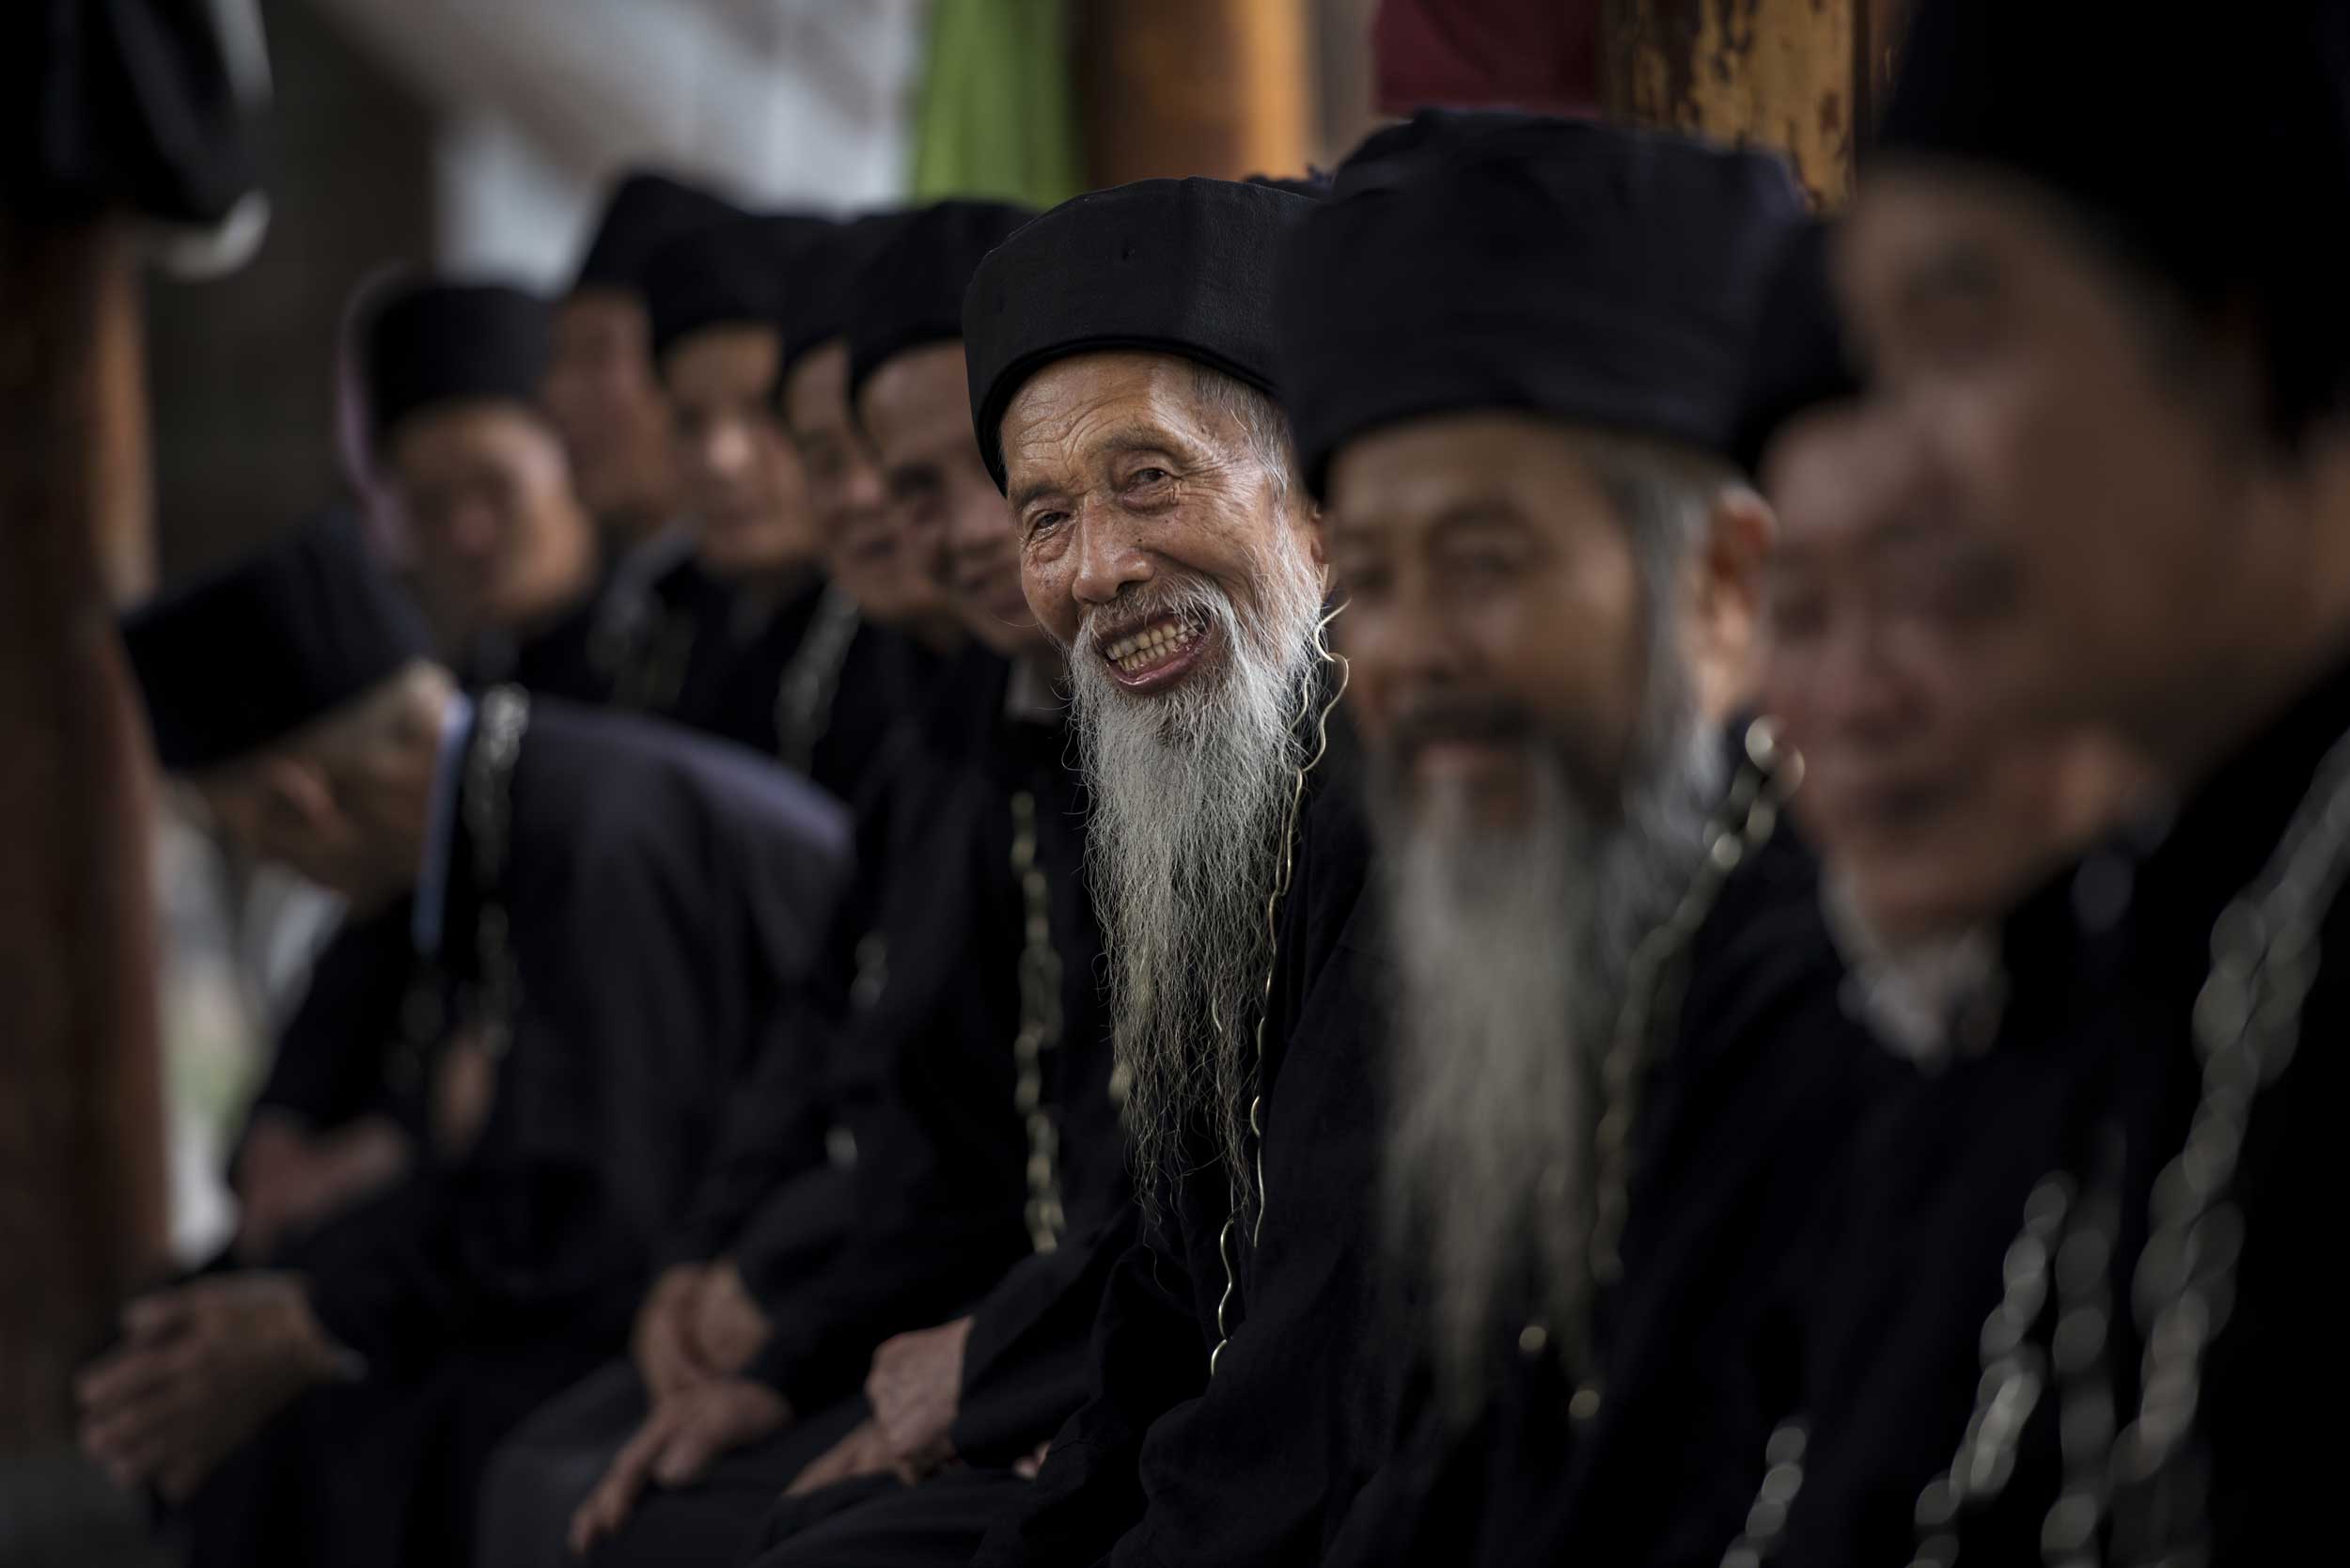 An old bearded Chinese man amongst other faces looking at camera, China